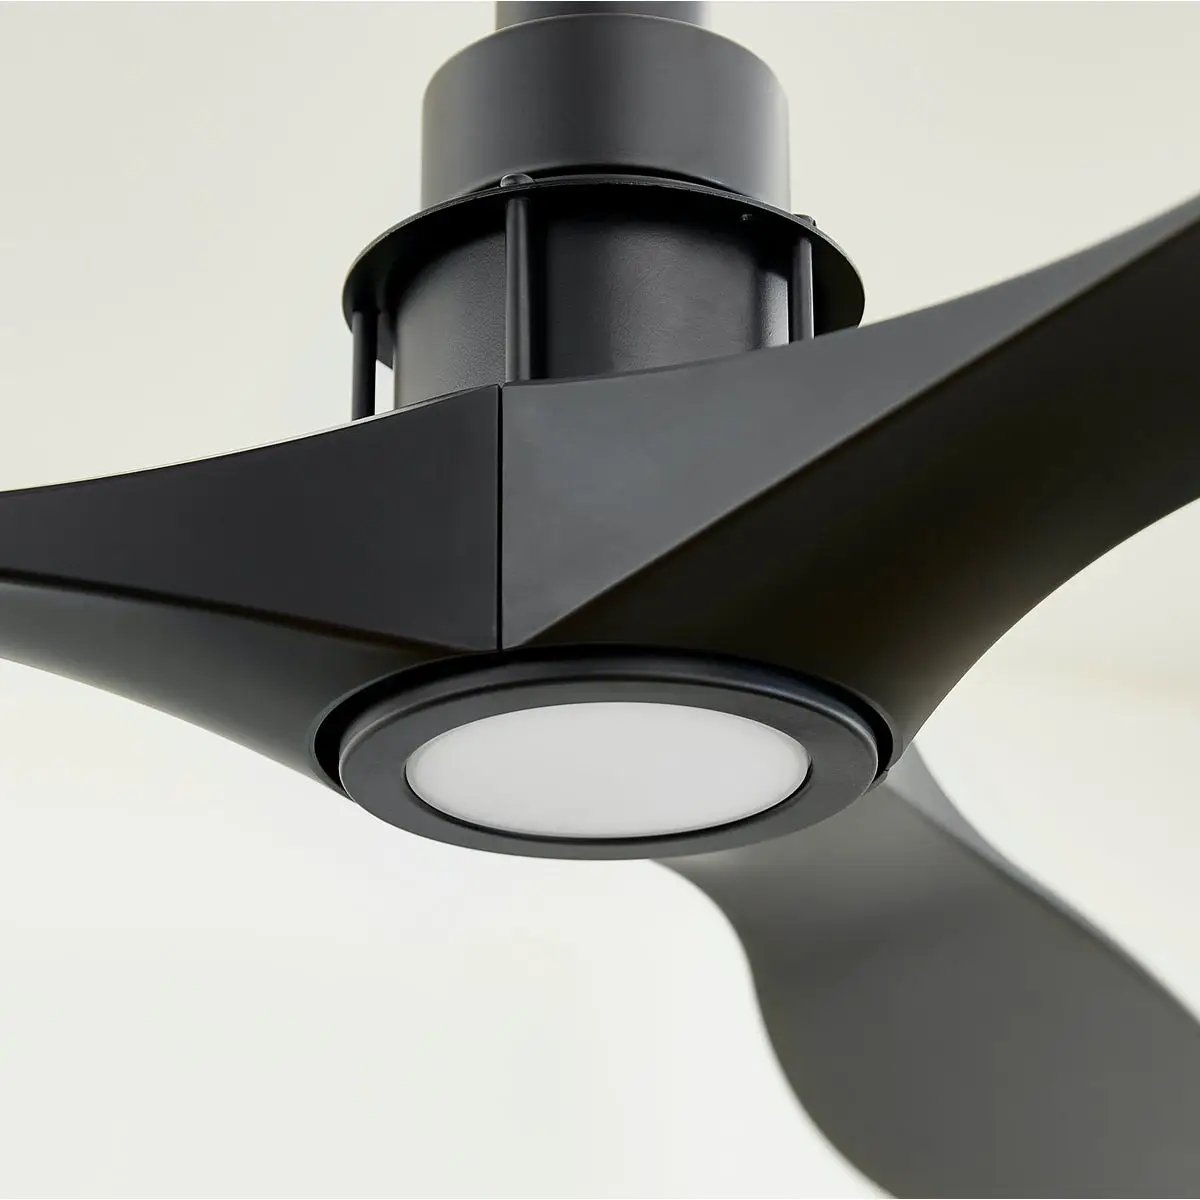 A sleek and modern ceiling fan with a light kit, featuring a chrome stained housing and three monochromatic blades. Provides powerful and long-lasting air circulation. Perfect for any interior space.